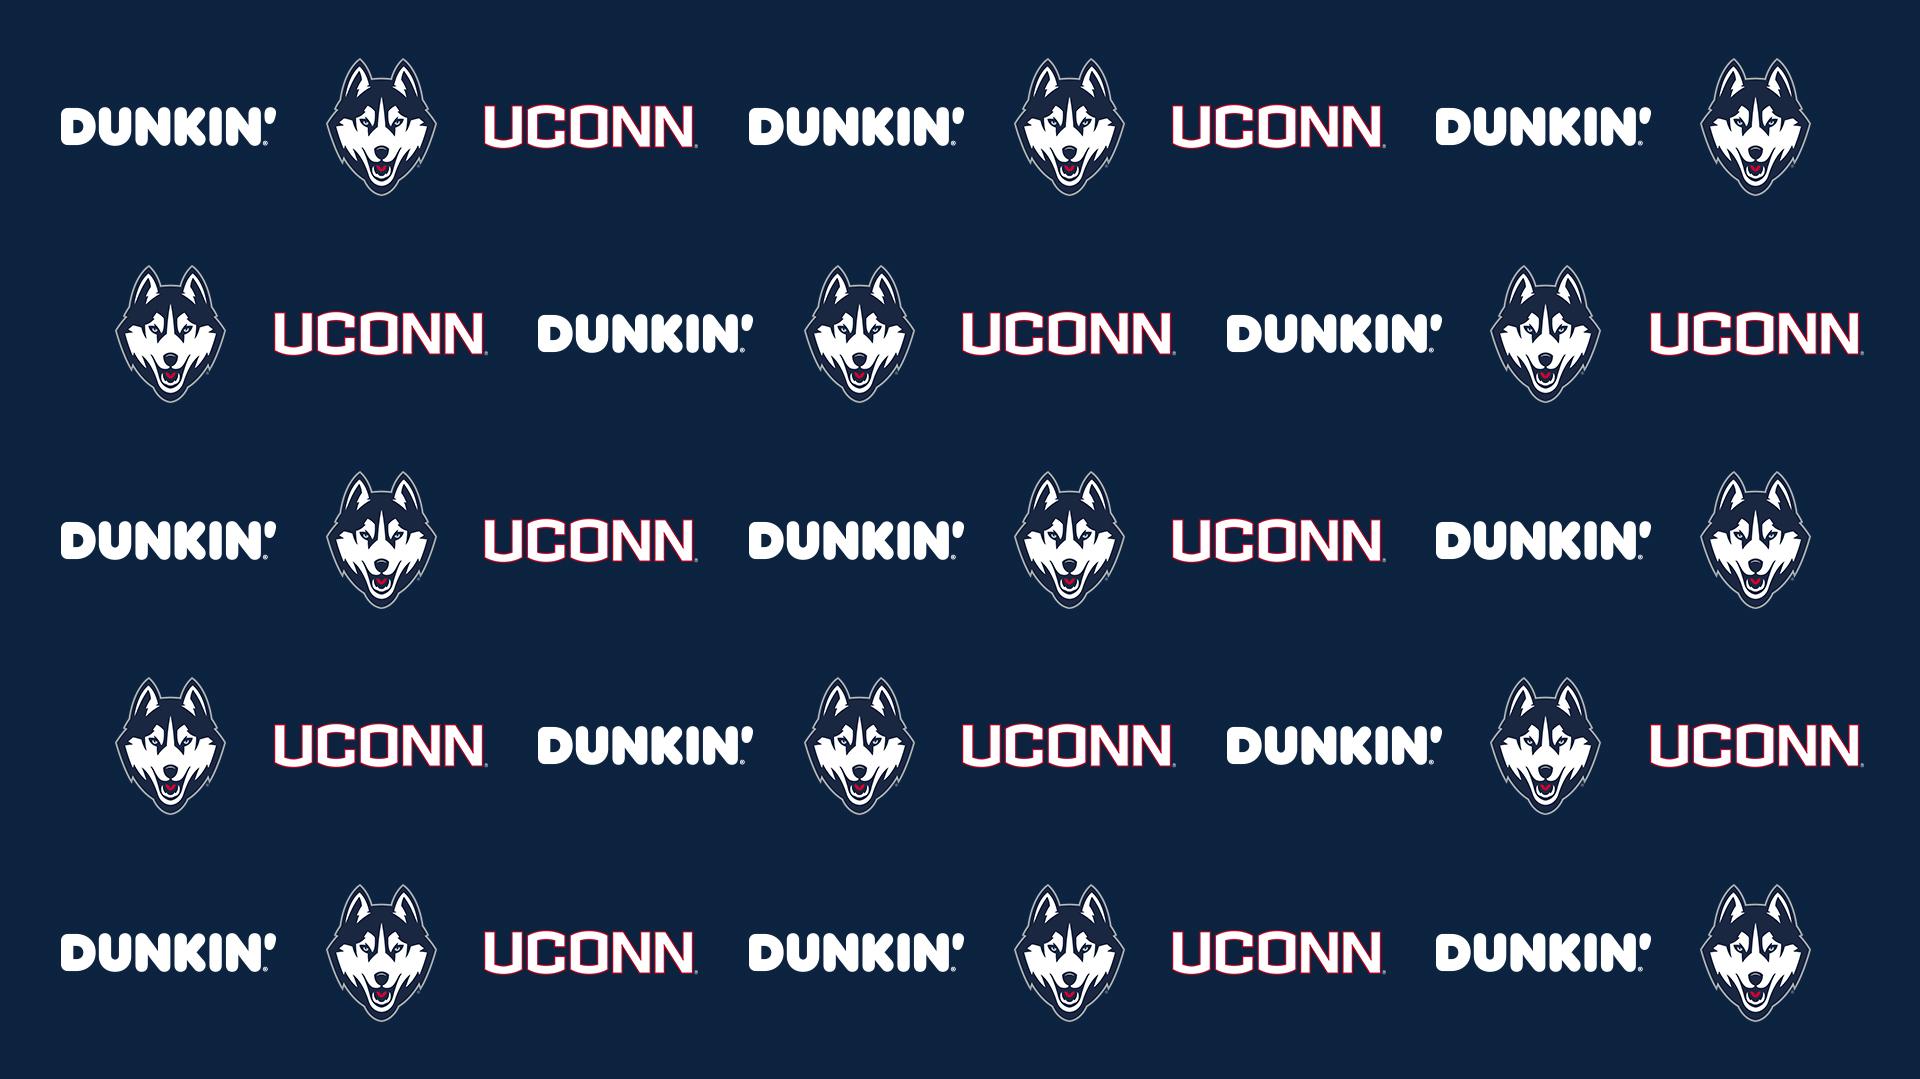 Uconn Huskies No Looking To Add Some Flair Your Zoom